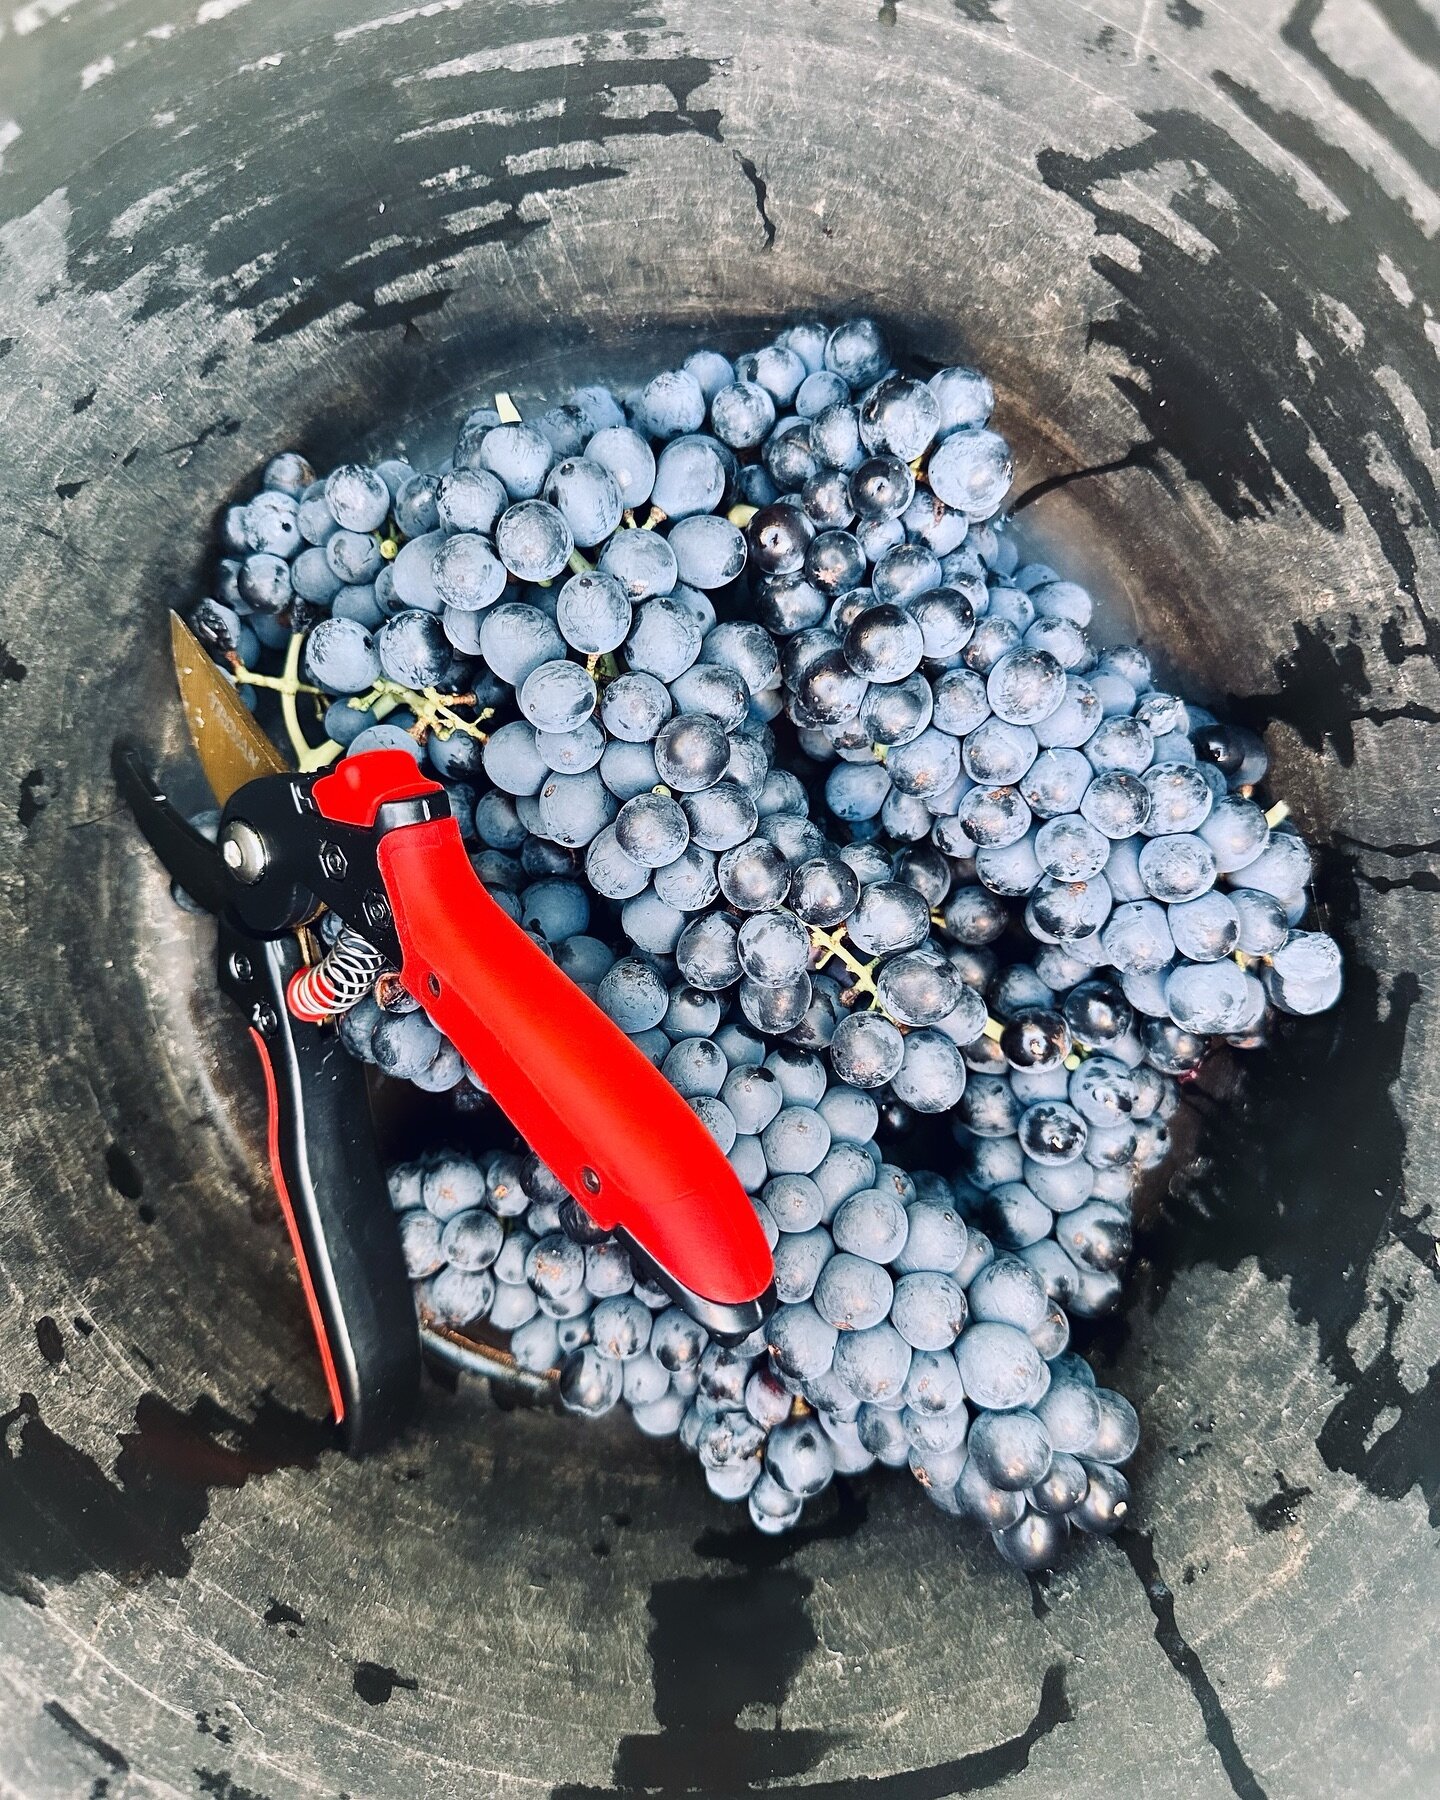 Grape Sampling: the most important stage before we even get to the fun winemaking stage. Out testing the Baum&eacute; (sugar) and acid levels in the grapes to plan for when we get in and handpick these beauties! 👨🏻&zwj;🔬 🍇 

#baume #shiraz #hunte